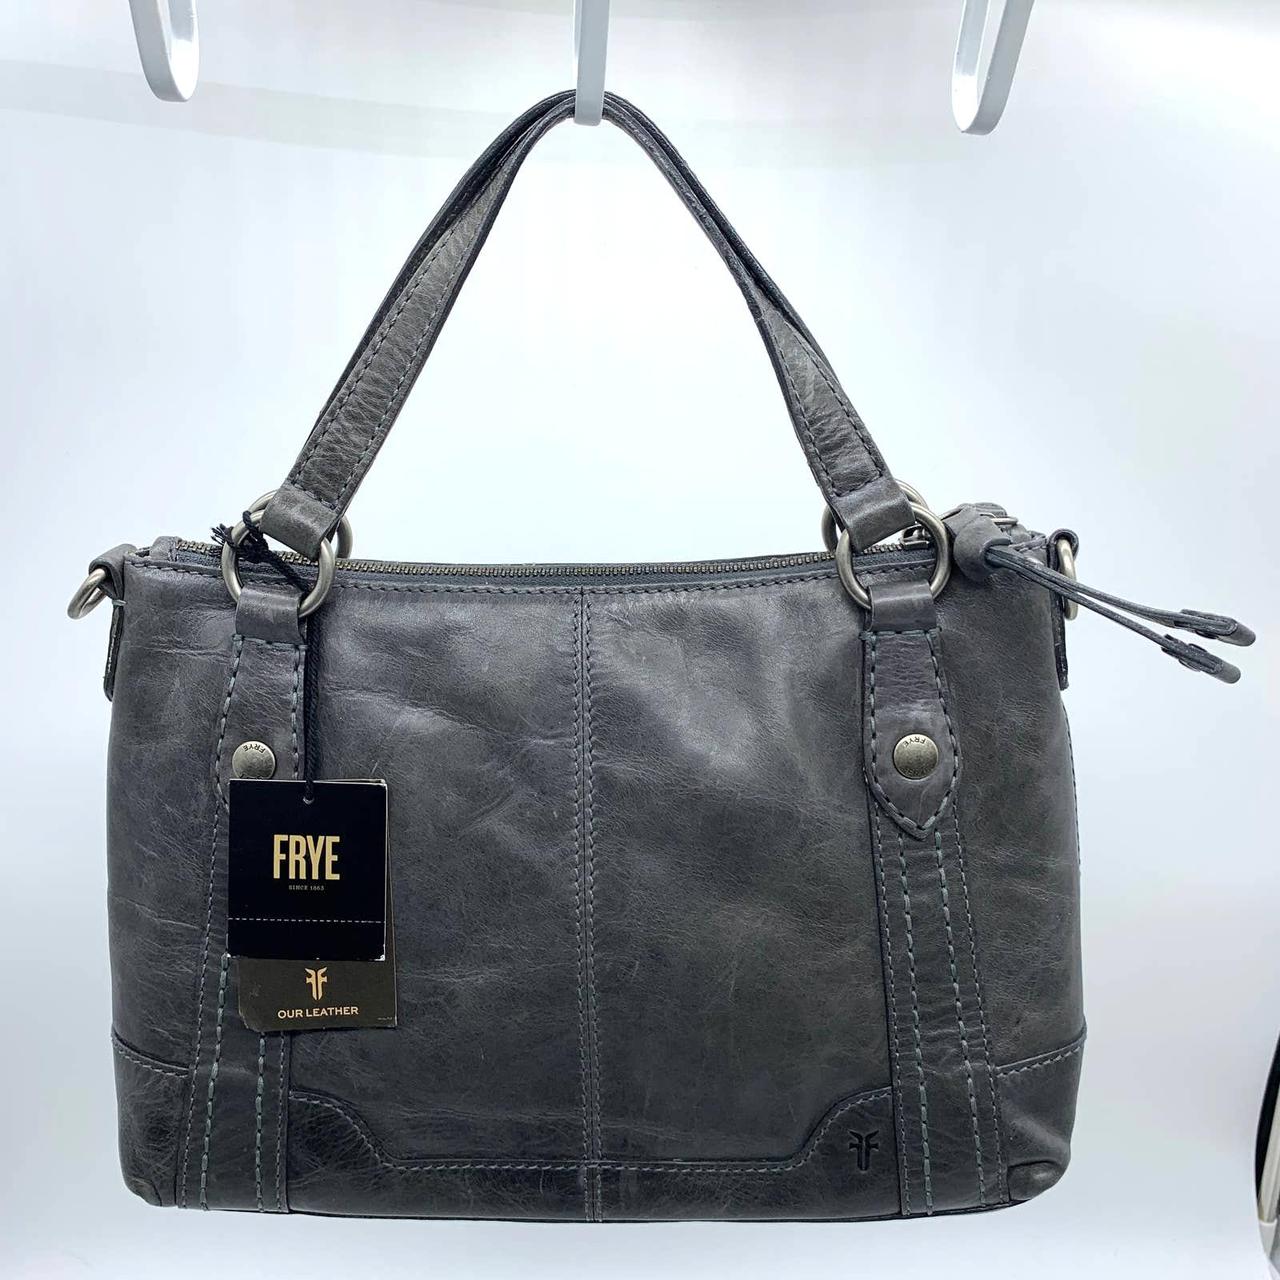 Frye and Co. Key Item Tote Bag | Vancouver Mall